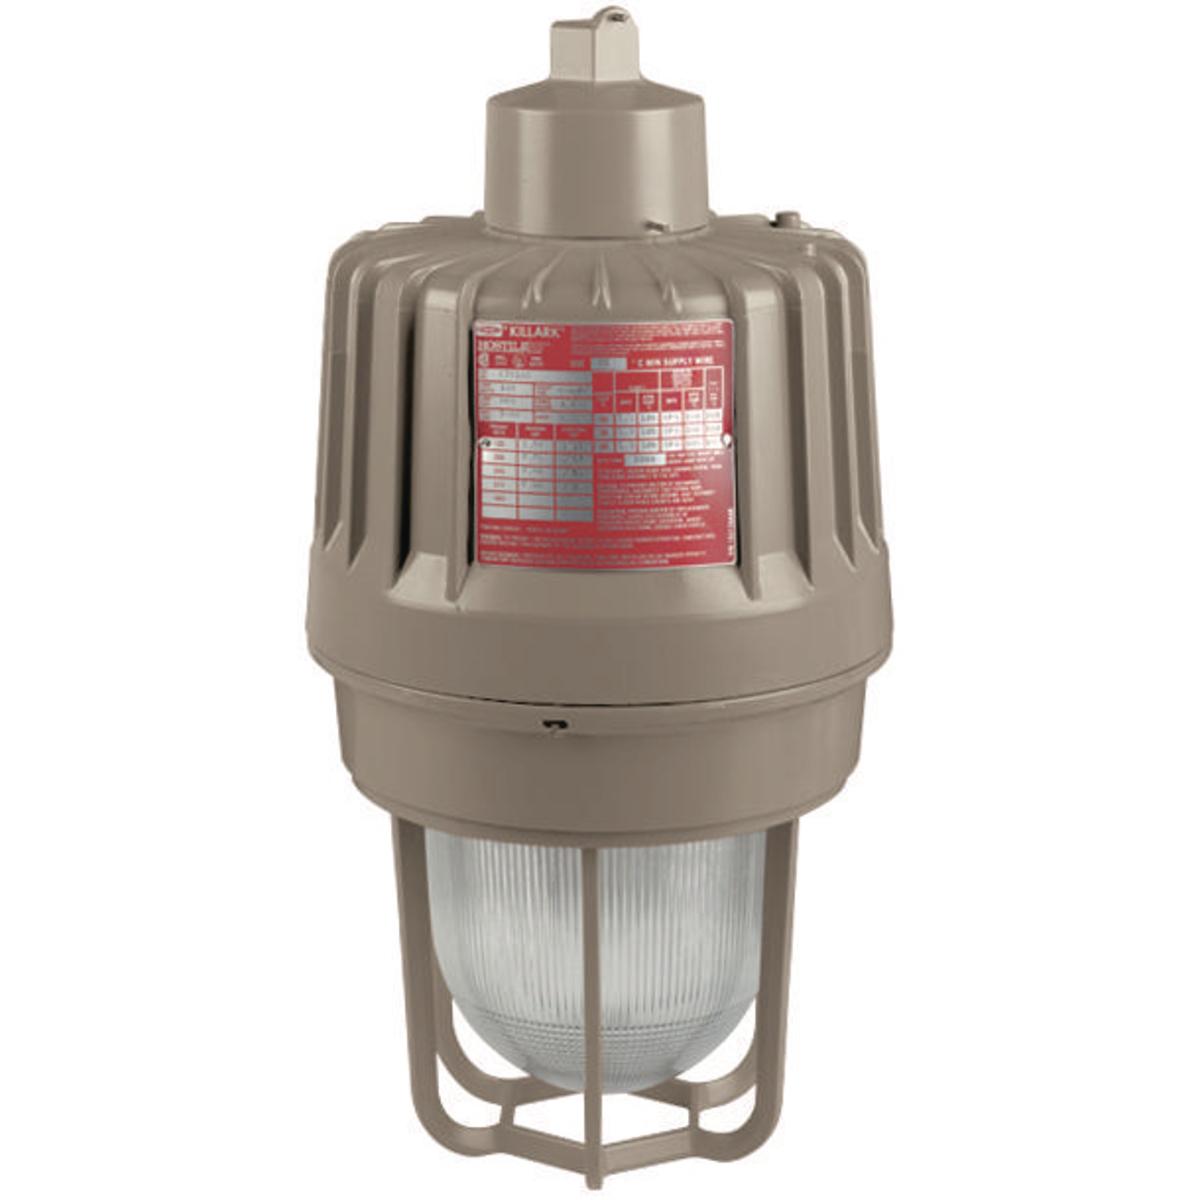 Hubbell EZL10030A2G EZL 120-277V 3/4" NPT Pendant Mount Fluted Globe with Guard  ; The EZL Series LED High Bay/ Low Bay fixtures are high quality explosion proof light fixtures. Designed to go into the harshest environments where explosive vapors are present .